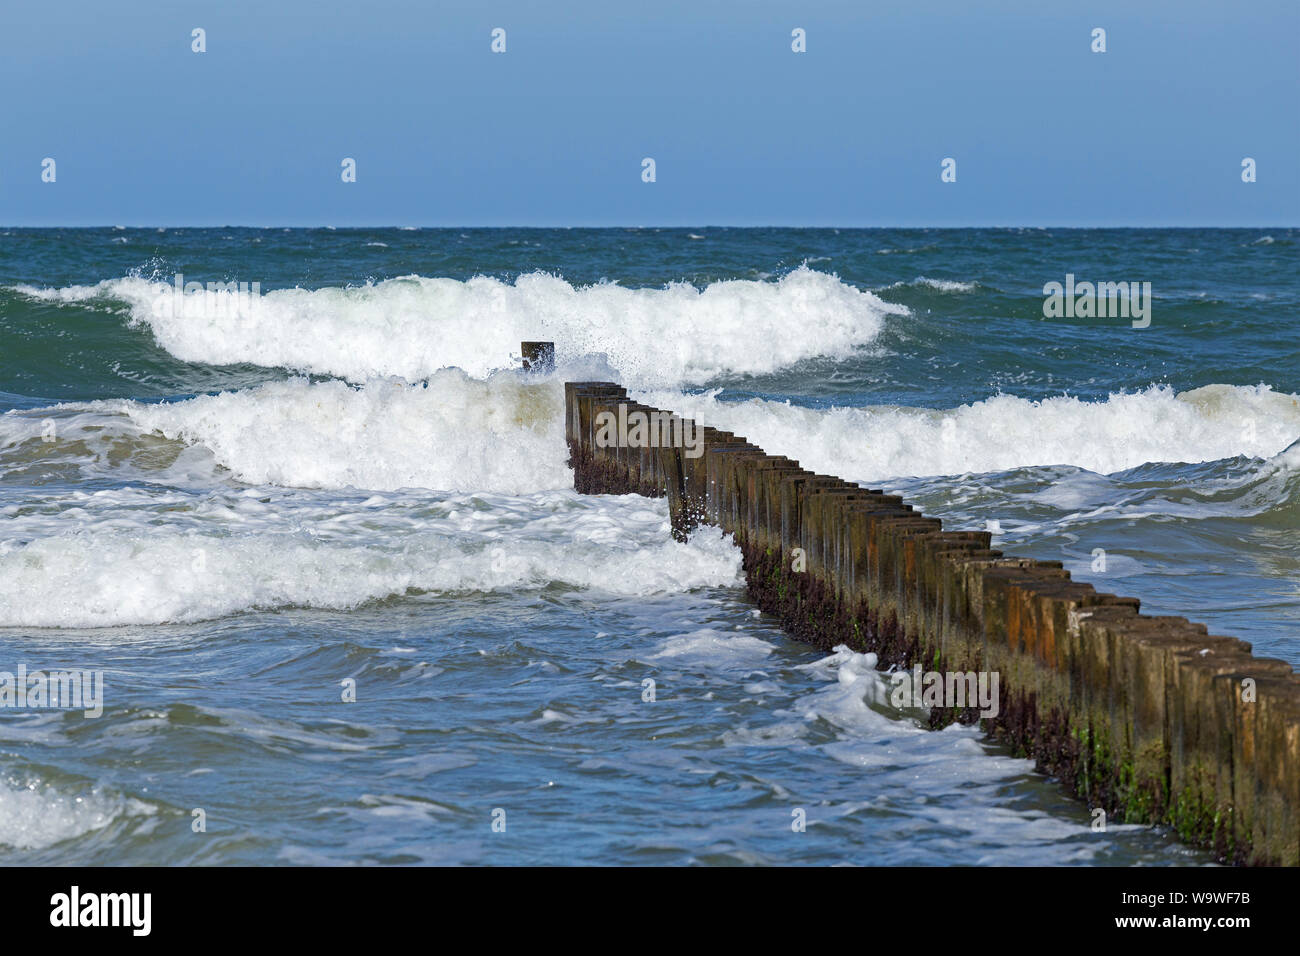 wind waves at the beach of Wustrow, Fischland, Mecklenburg-West Pomerania, Germany Stock Photo